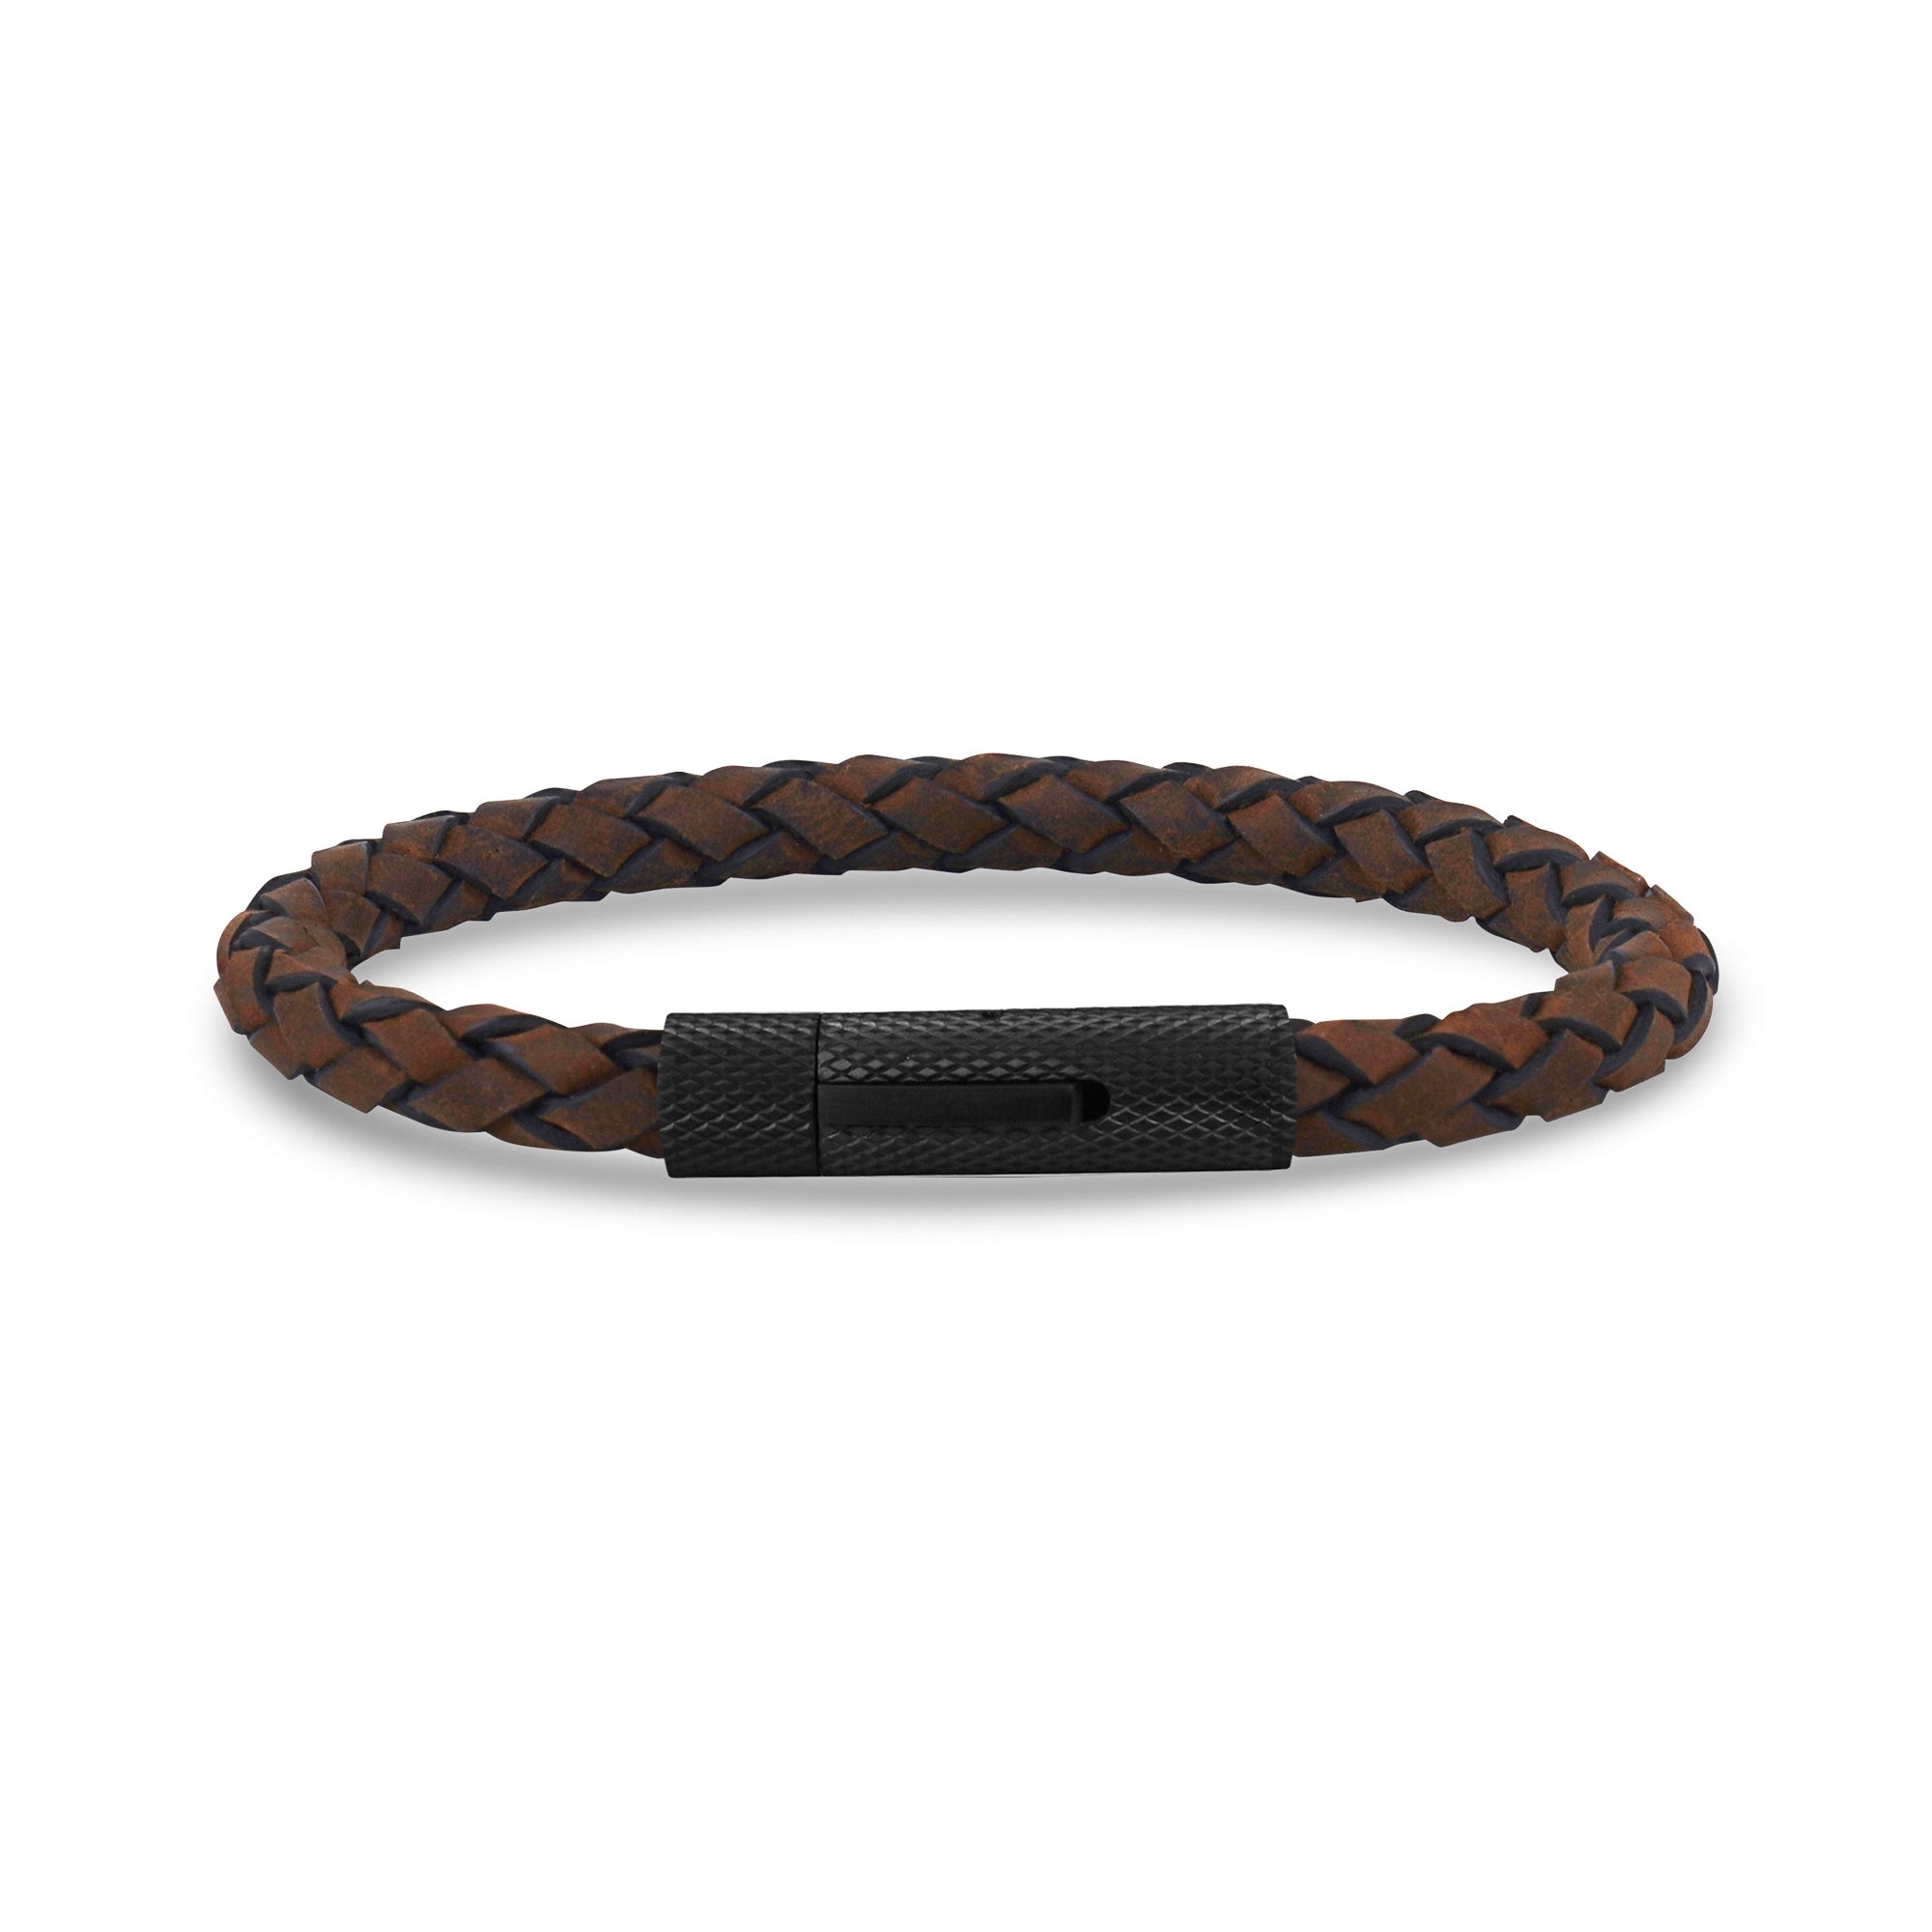 Men's Crucible Brown Twine Stainless Steel Accents Woven Braided Leather  Bangle Bracelet (12mm) - Black (8.5) : Target